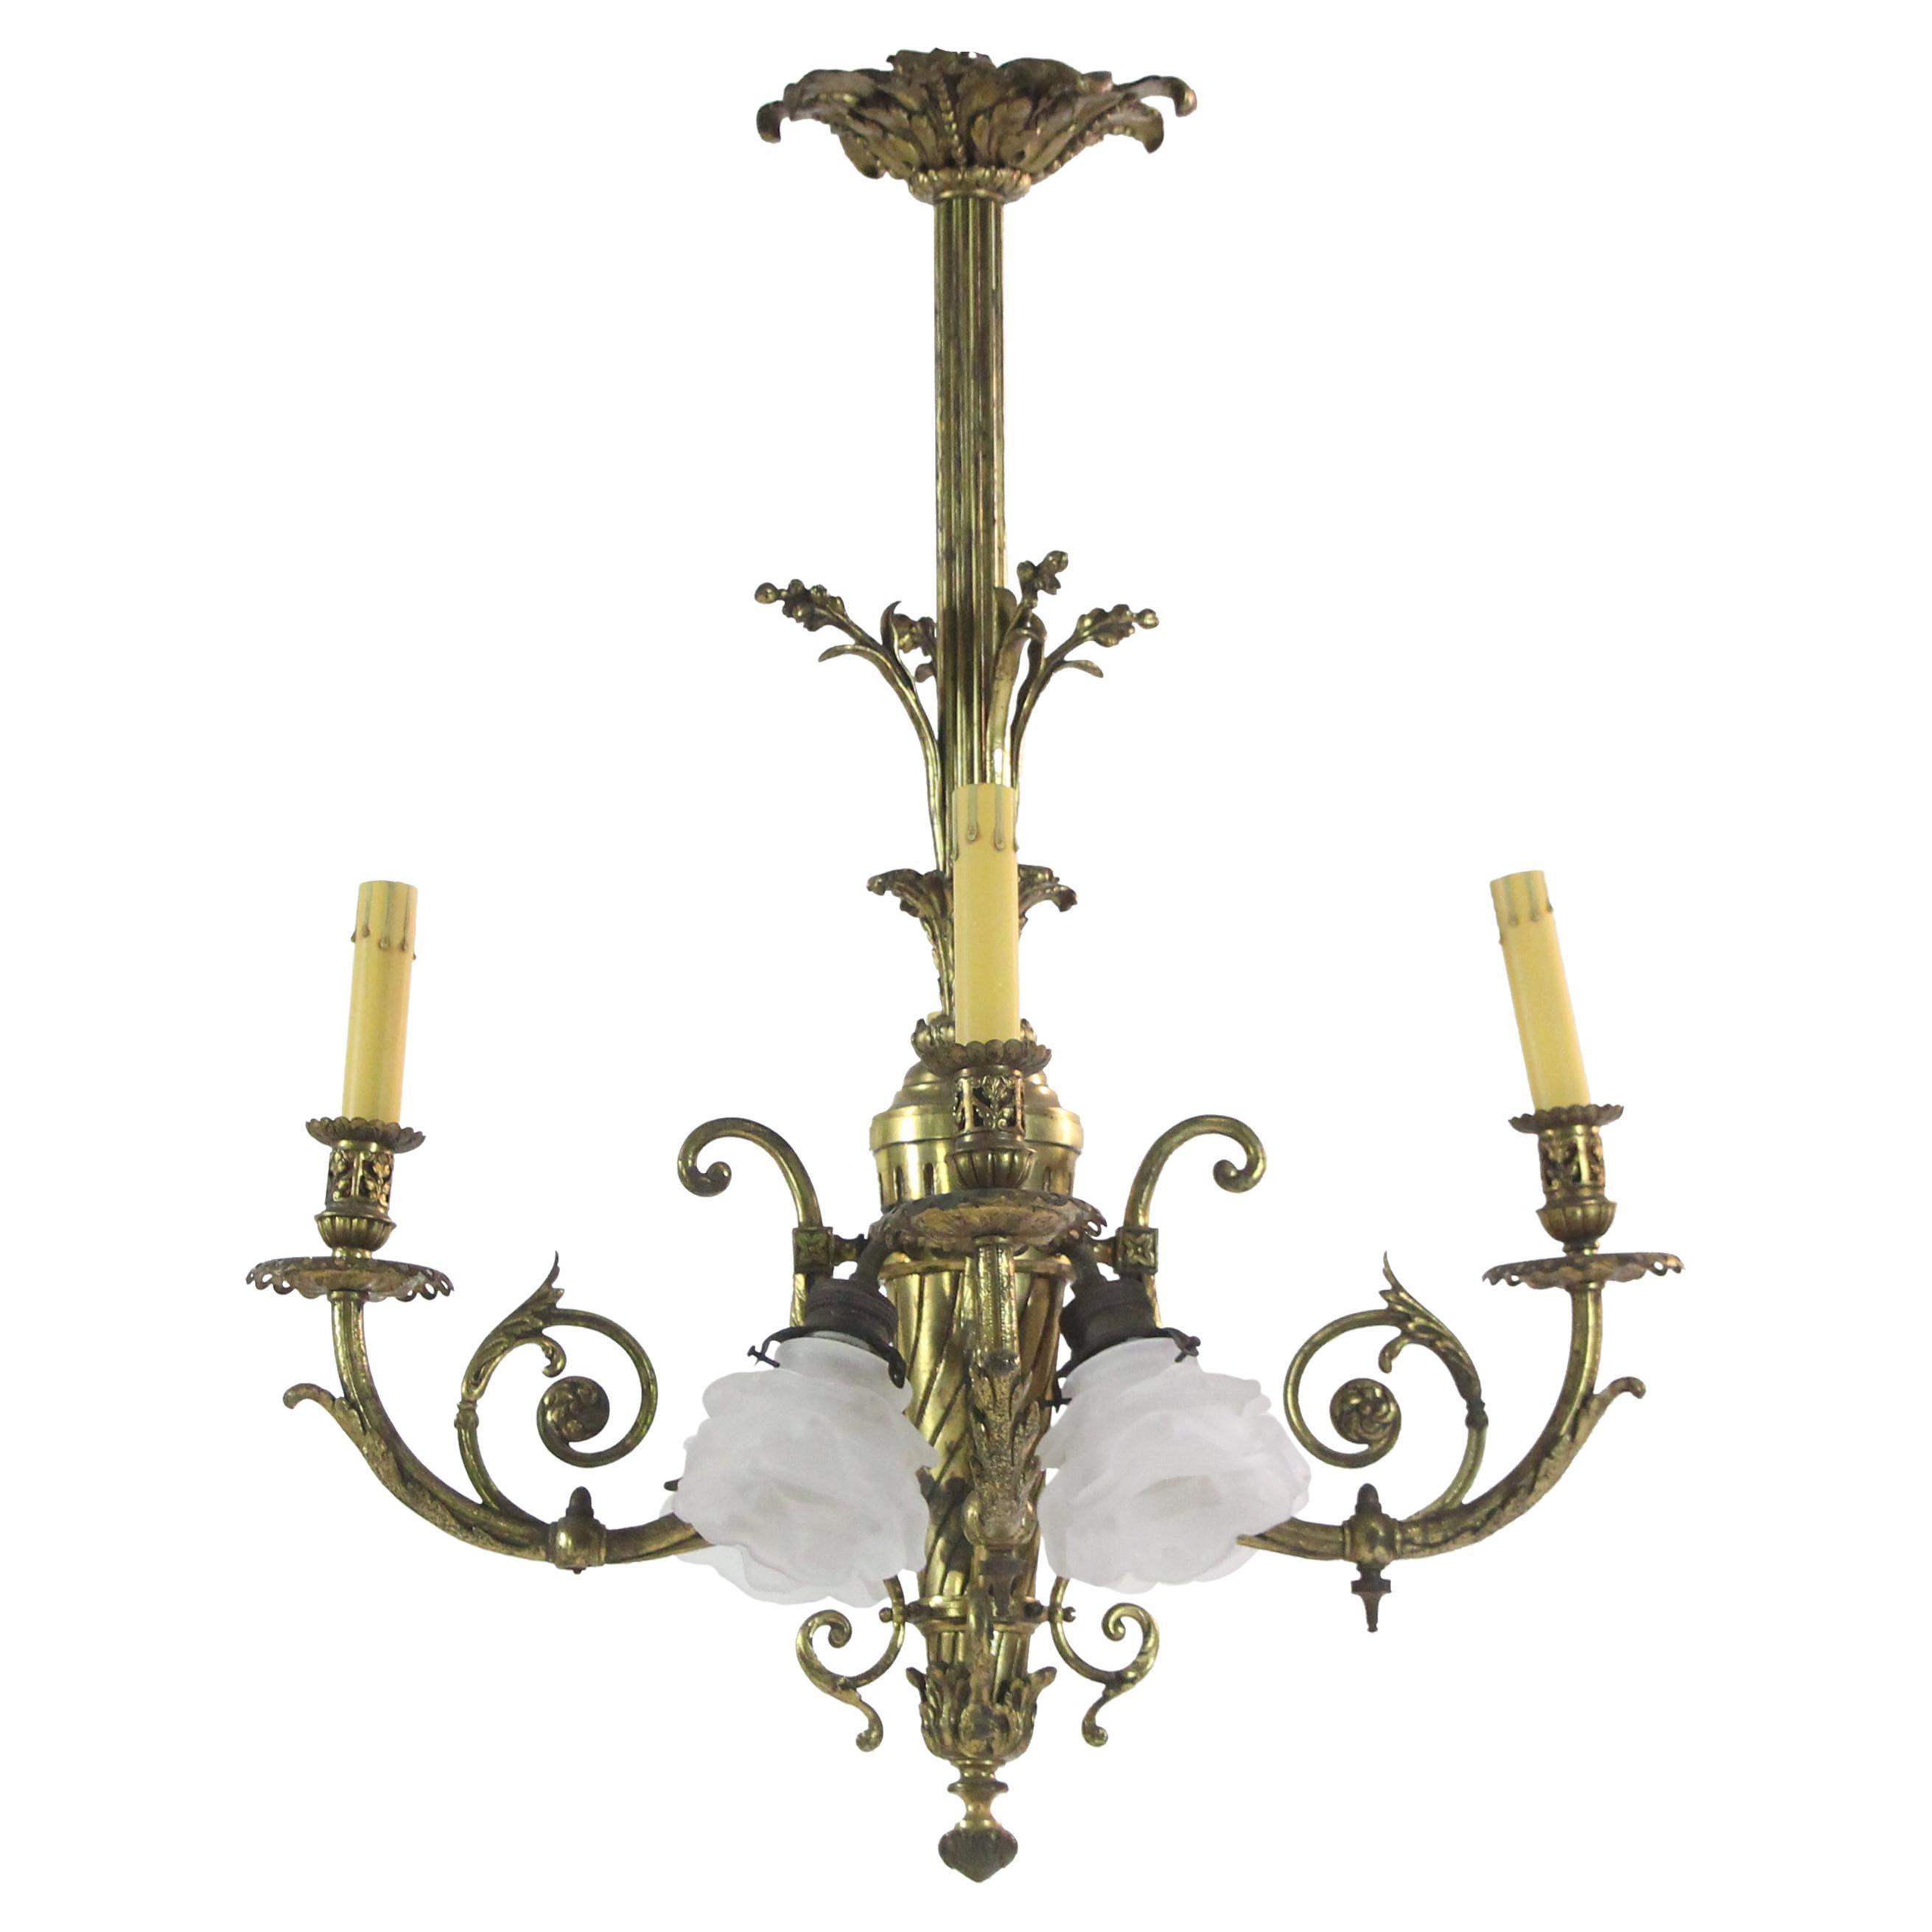 1800s French Bronze Foliate Candlestick Chandelier w/ Four Floral Down Lights